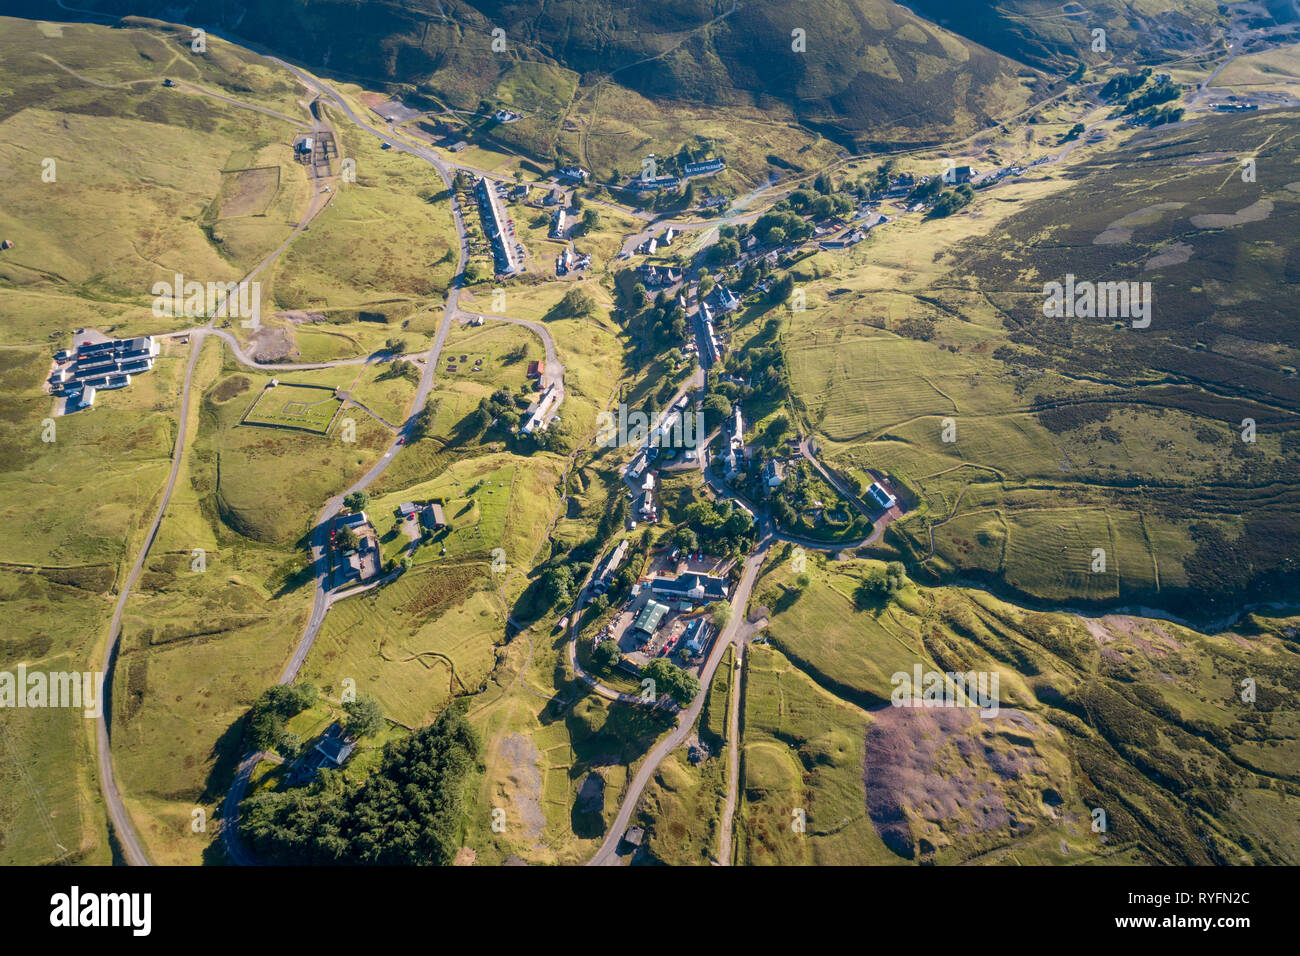 Arial Image of Wanlockhead, Scotland's highest village showing old mine workings and industrial waste. Stock Photo